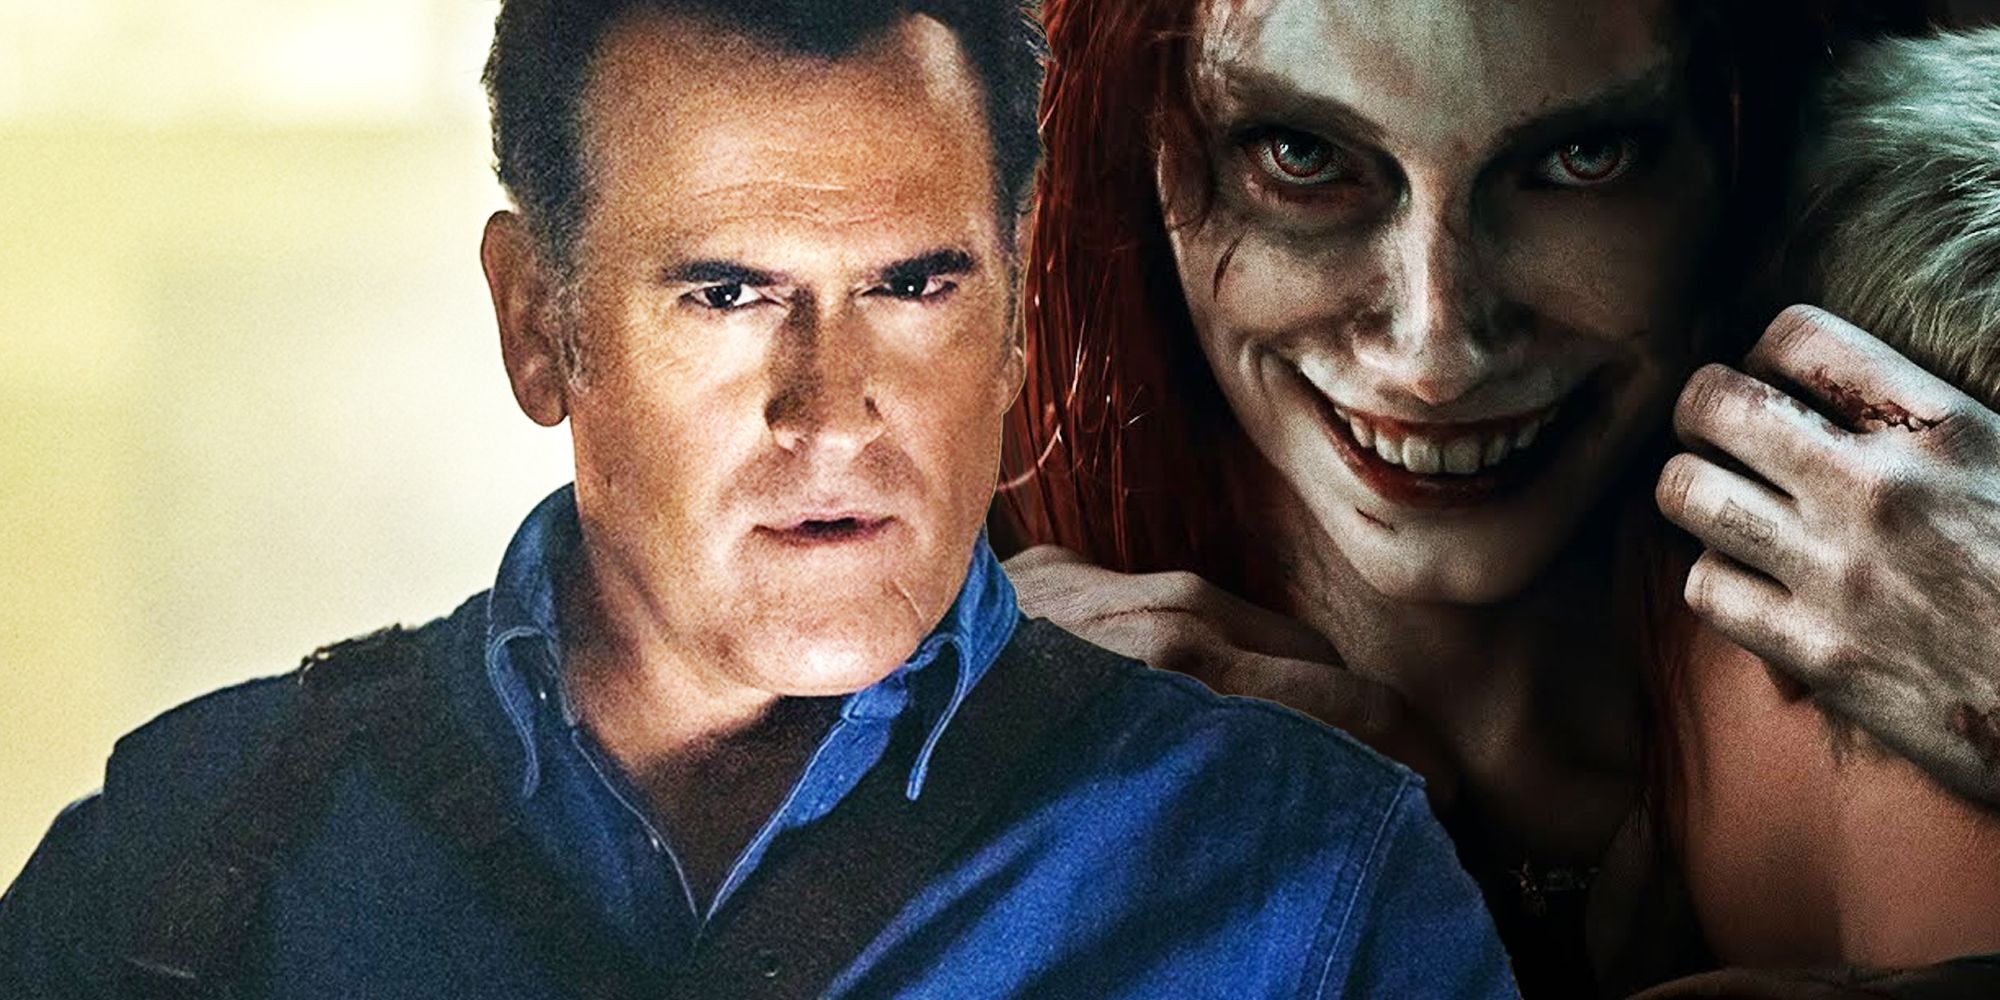 Bruce Campbell’s Perfect Evil Dead Movie Return Seems Way Less Likely After New Sam Raimi Announcement